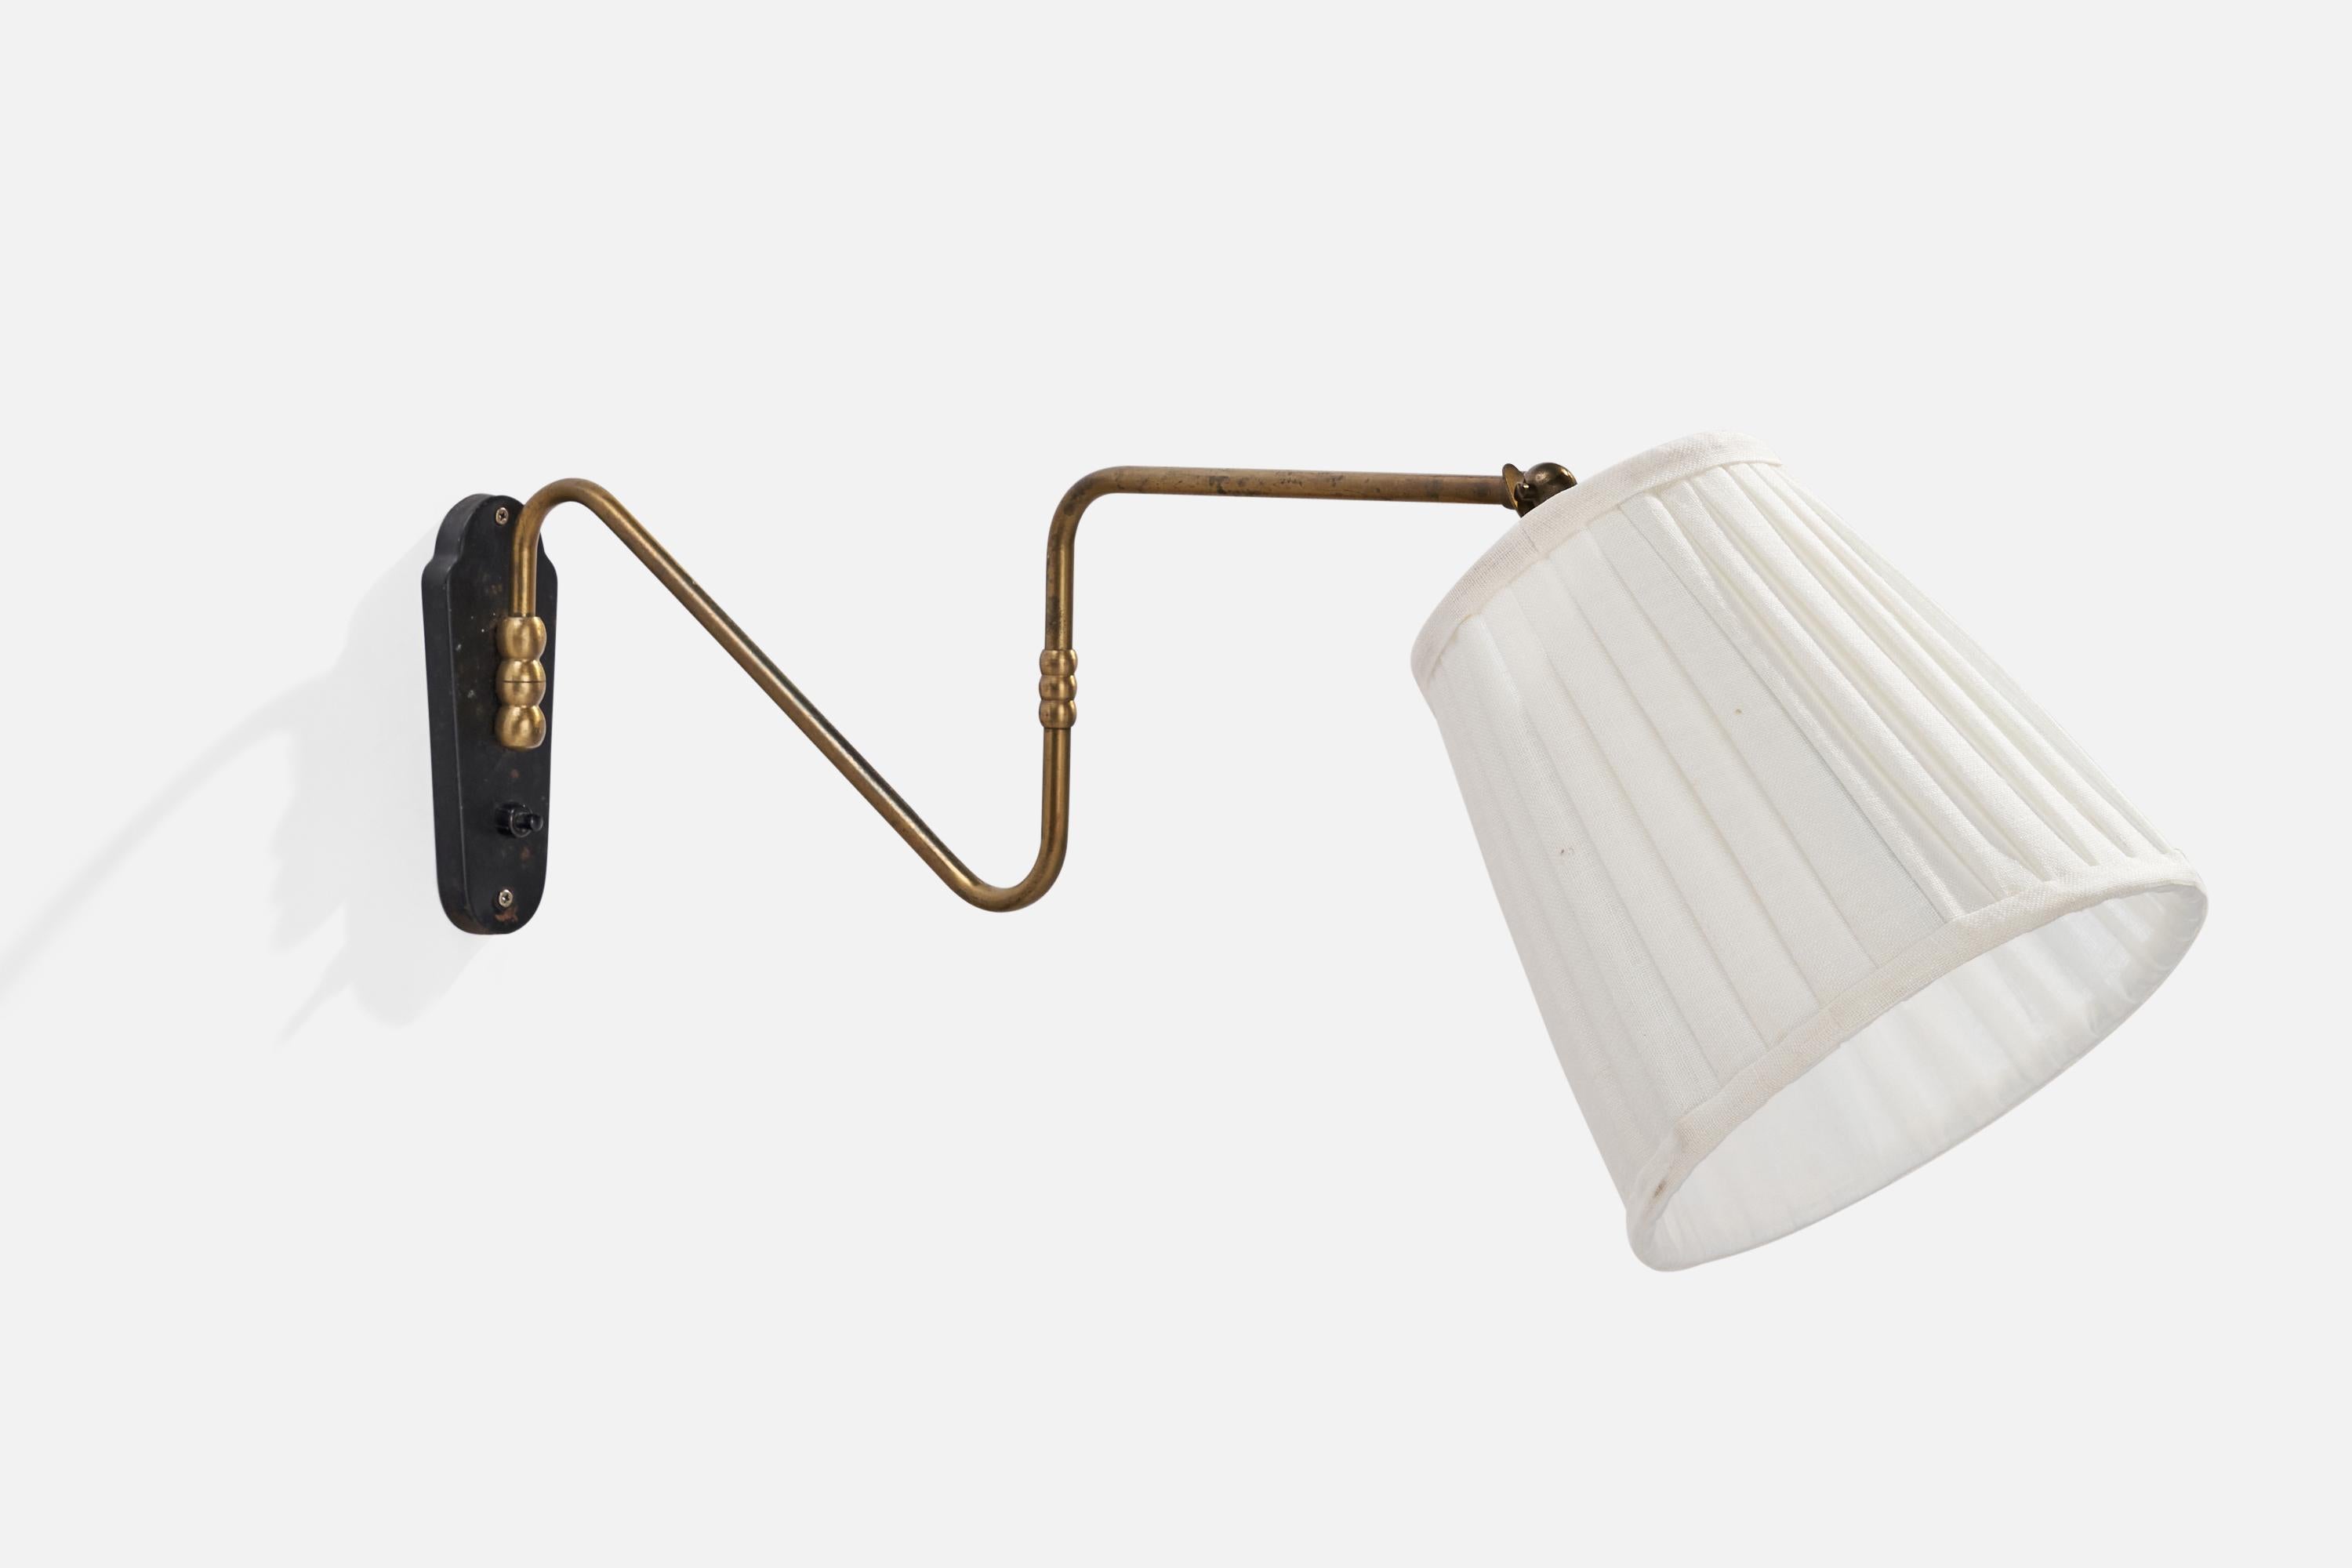 A black-lacquered metal, brass and white fabric wall light designed and produced in Denmark, 1940s.

Dimensions variable.
Overall Dimensions (inches): 8”  H x 10.5” W x 18.5”  D
Back Plate Dimensions (inches): 6.25” H x 2.25” W x .75”  D
Bulb